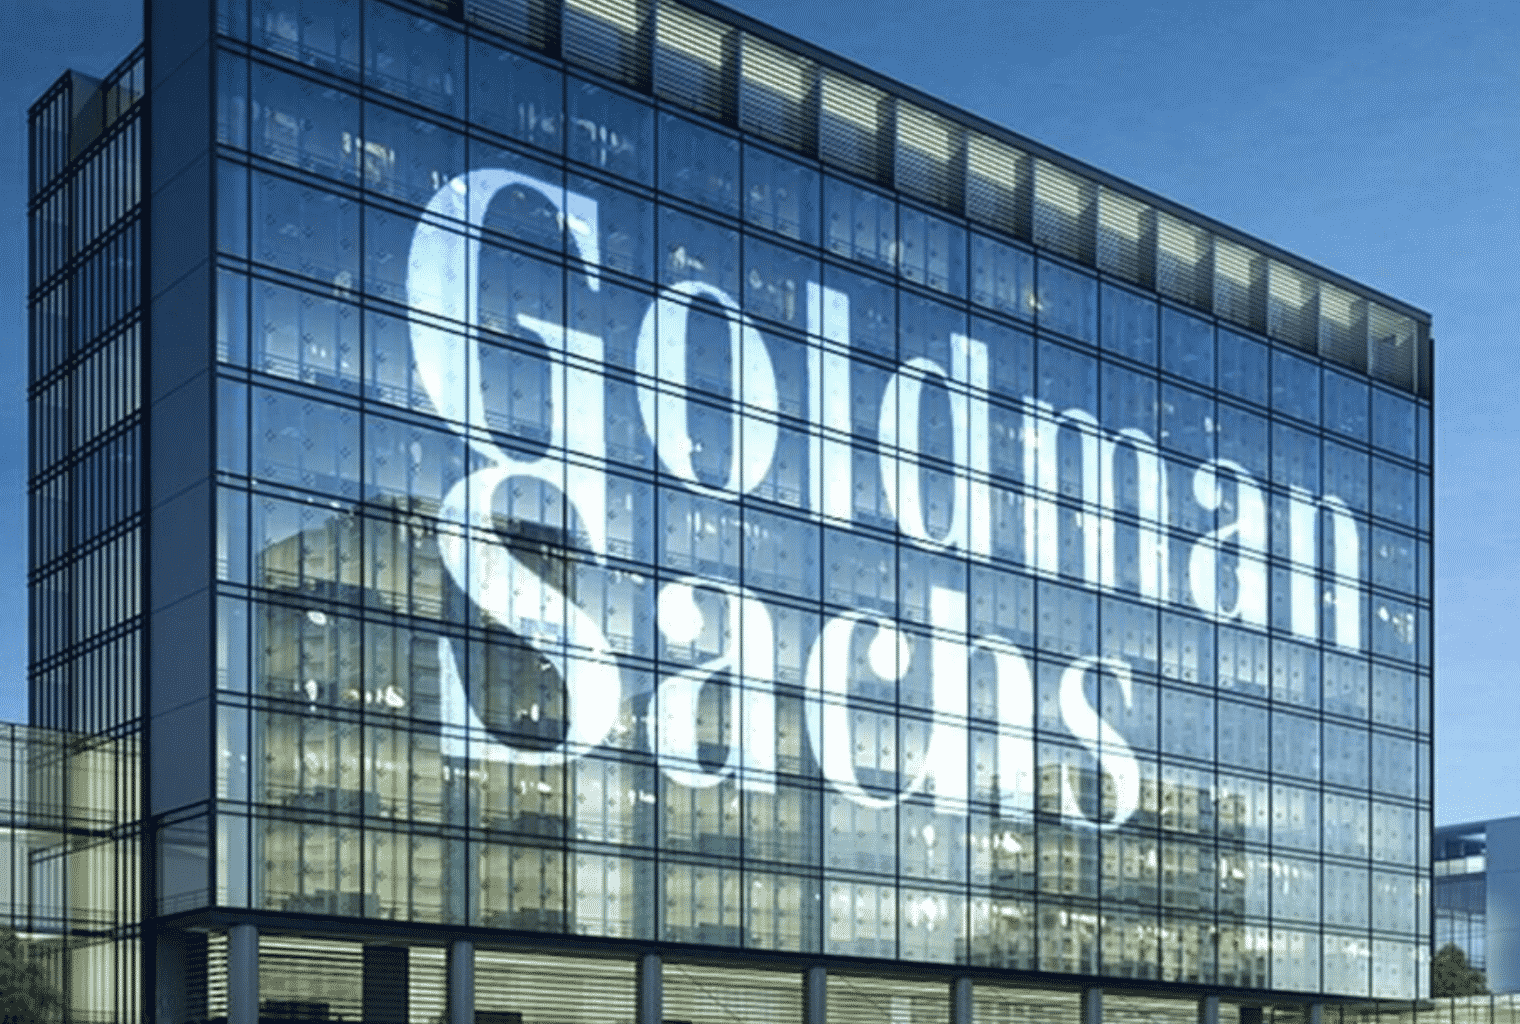 Second wave of COVID-19 pandemic will impact India’s economic recovery: Goldman Sachs